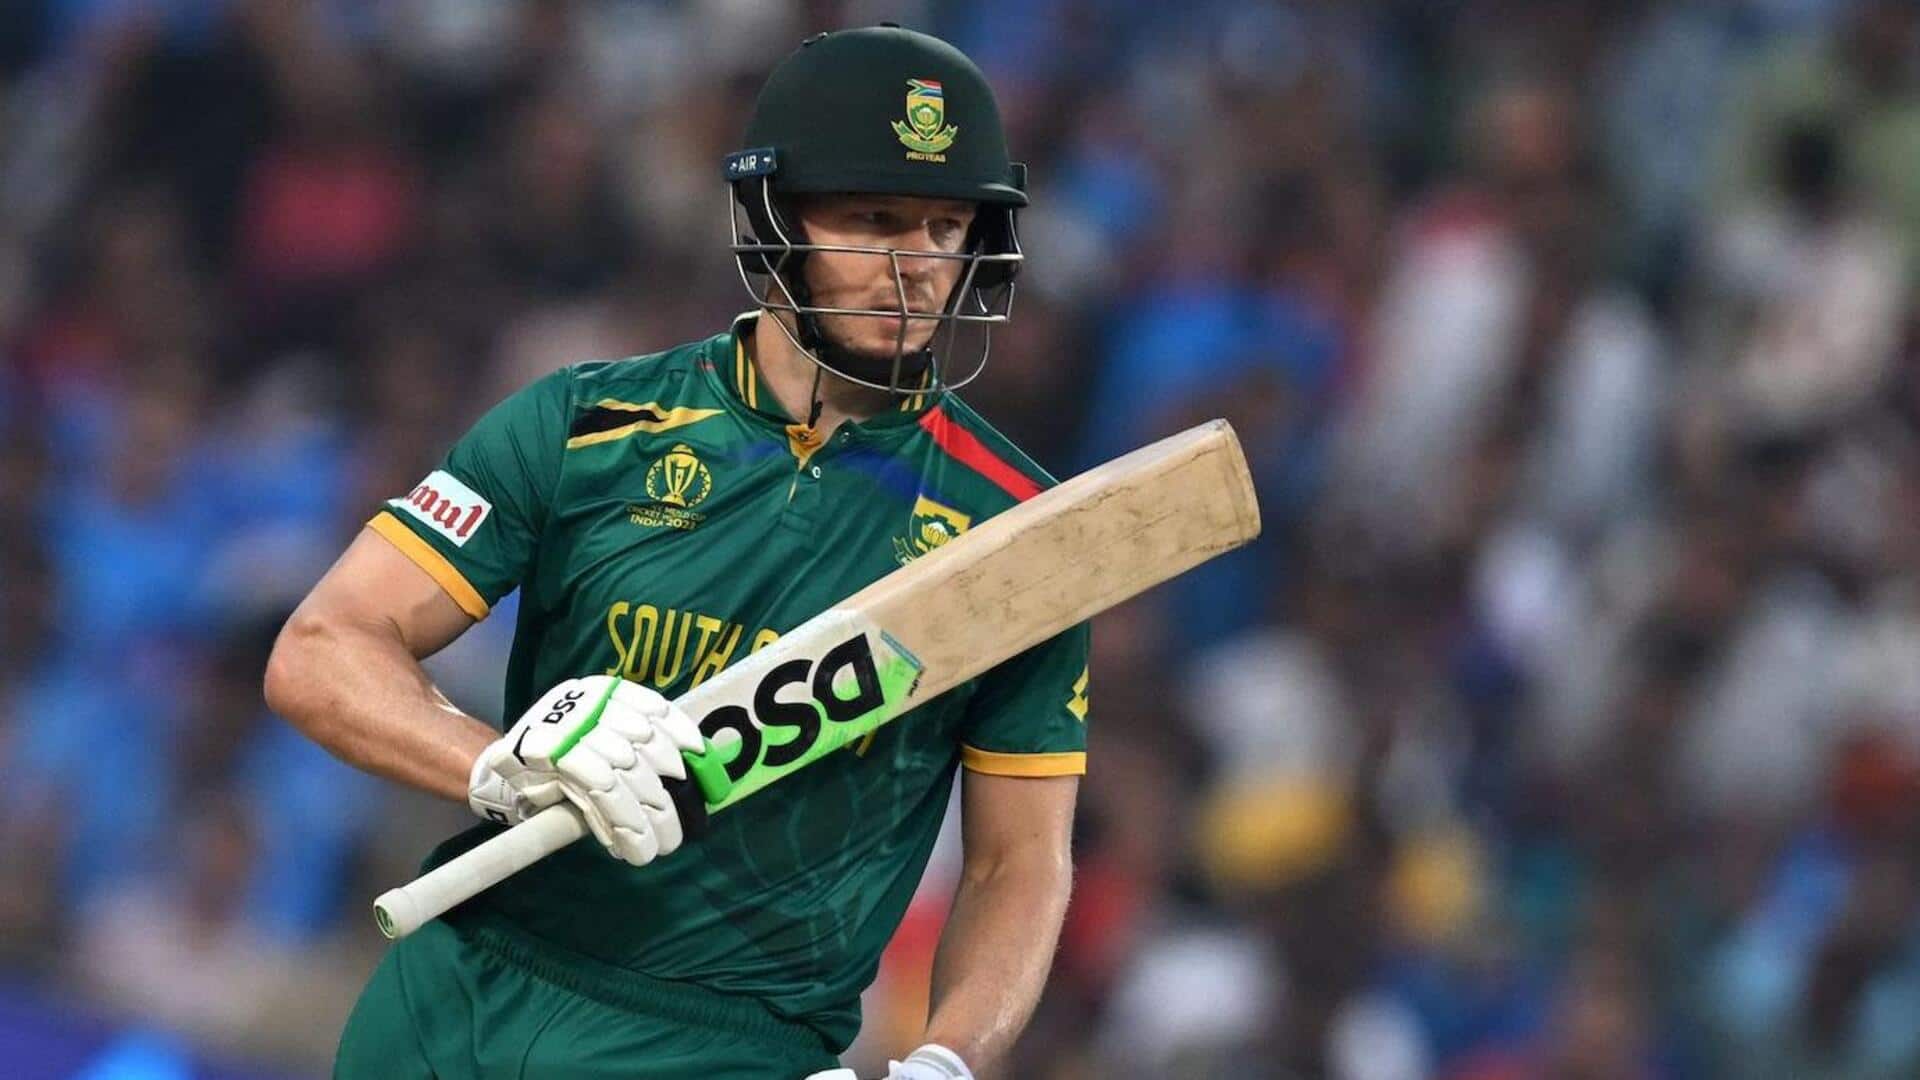 ICC World Cup: David Miller smashes his 24th ODI fifty